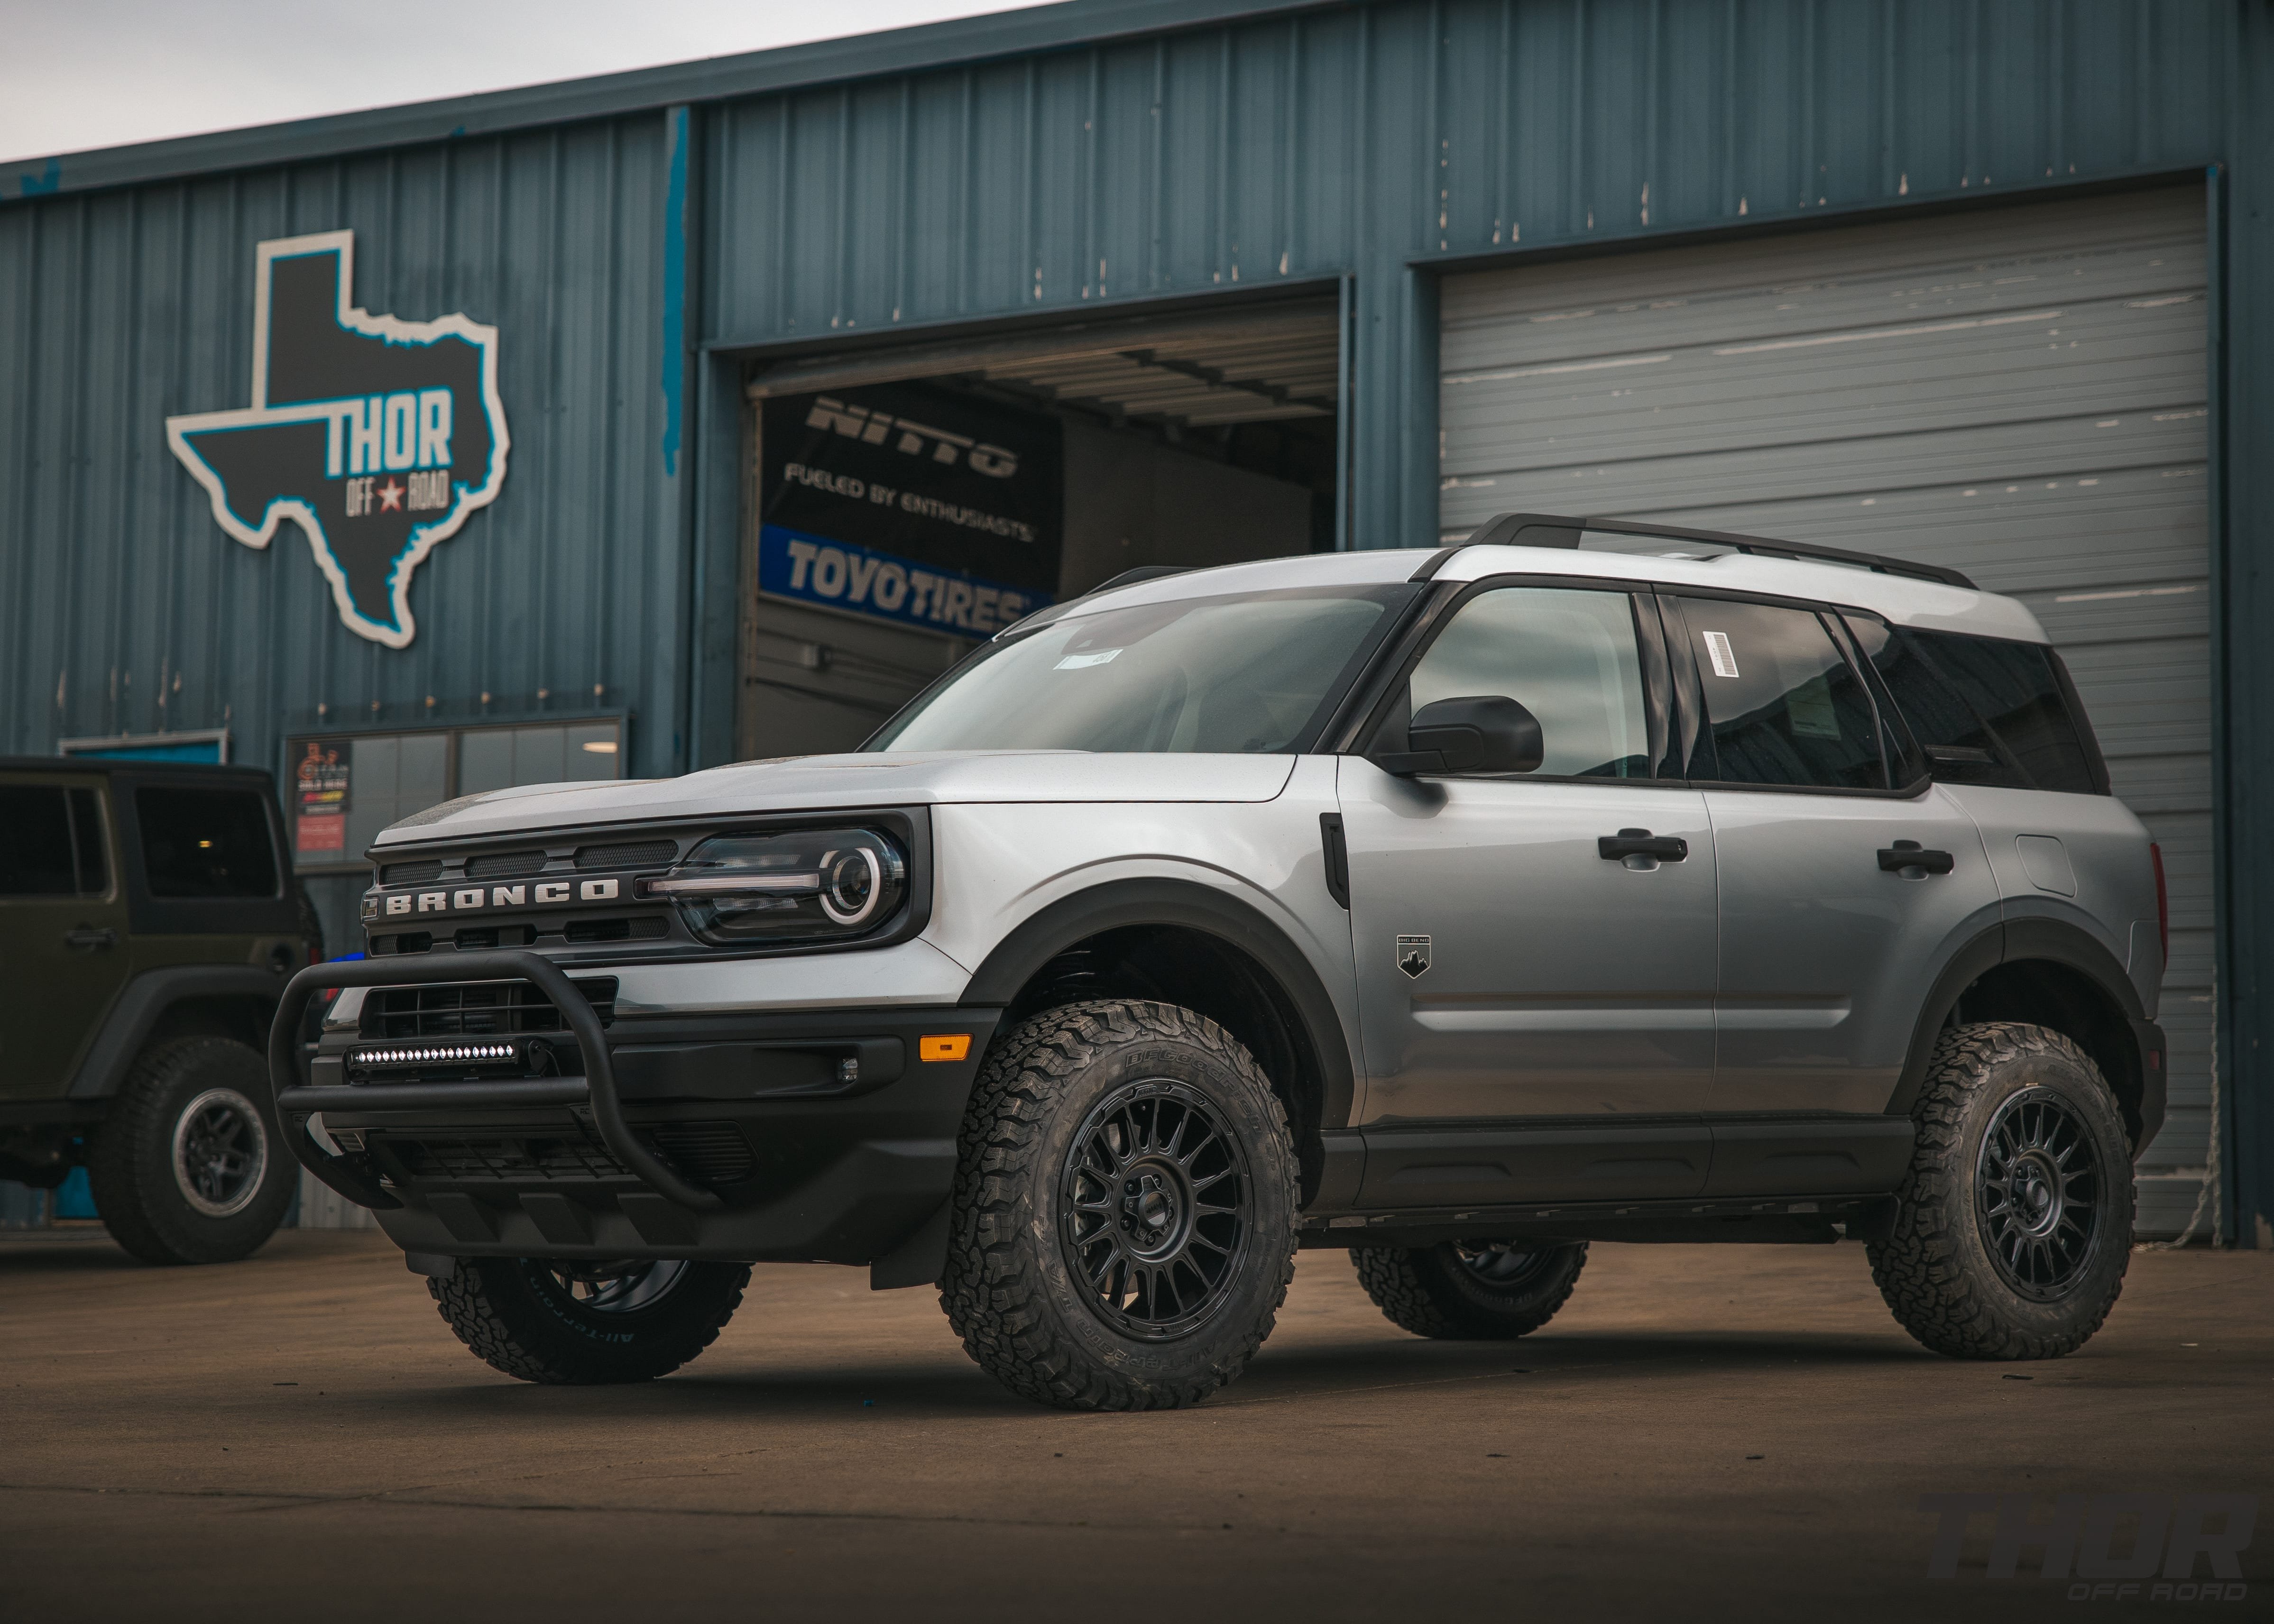 2021 Ford Bronco Big Bend in Silver with 1.5" ReadyLift Suspension Kit, 17x8" KMC Wheels, 265/45R17 BFG Tires, Rough Counttry Nudge Bar, 20" Bumper Light Bar